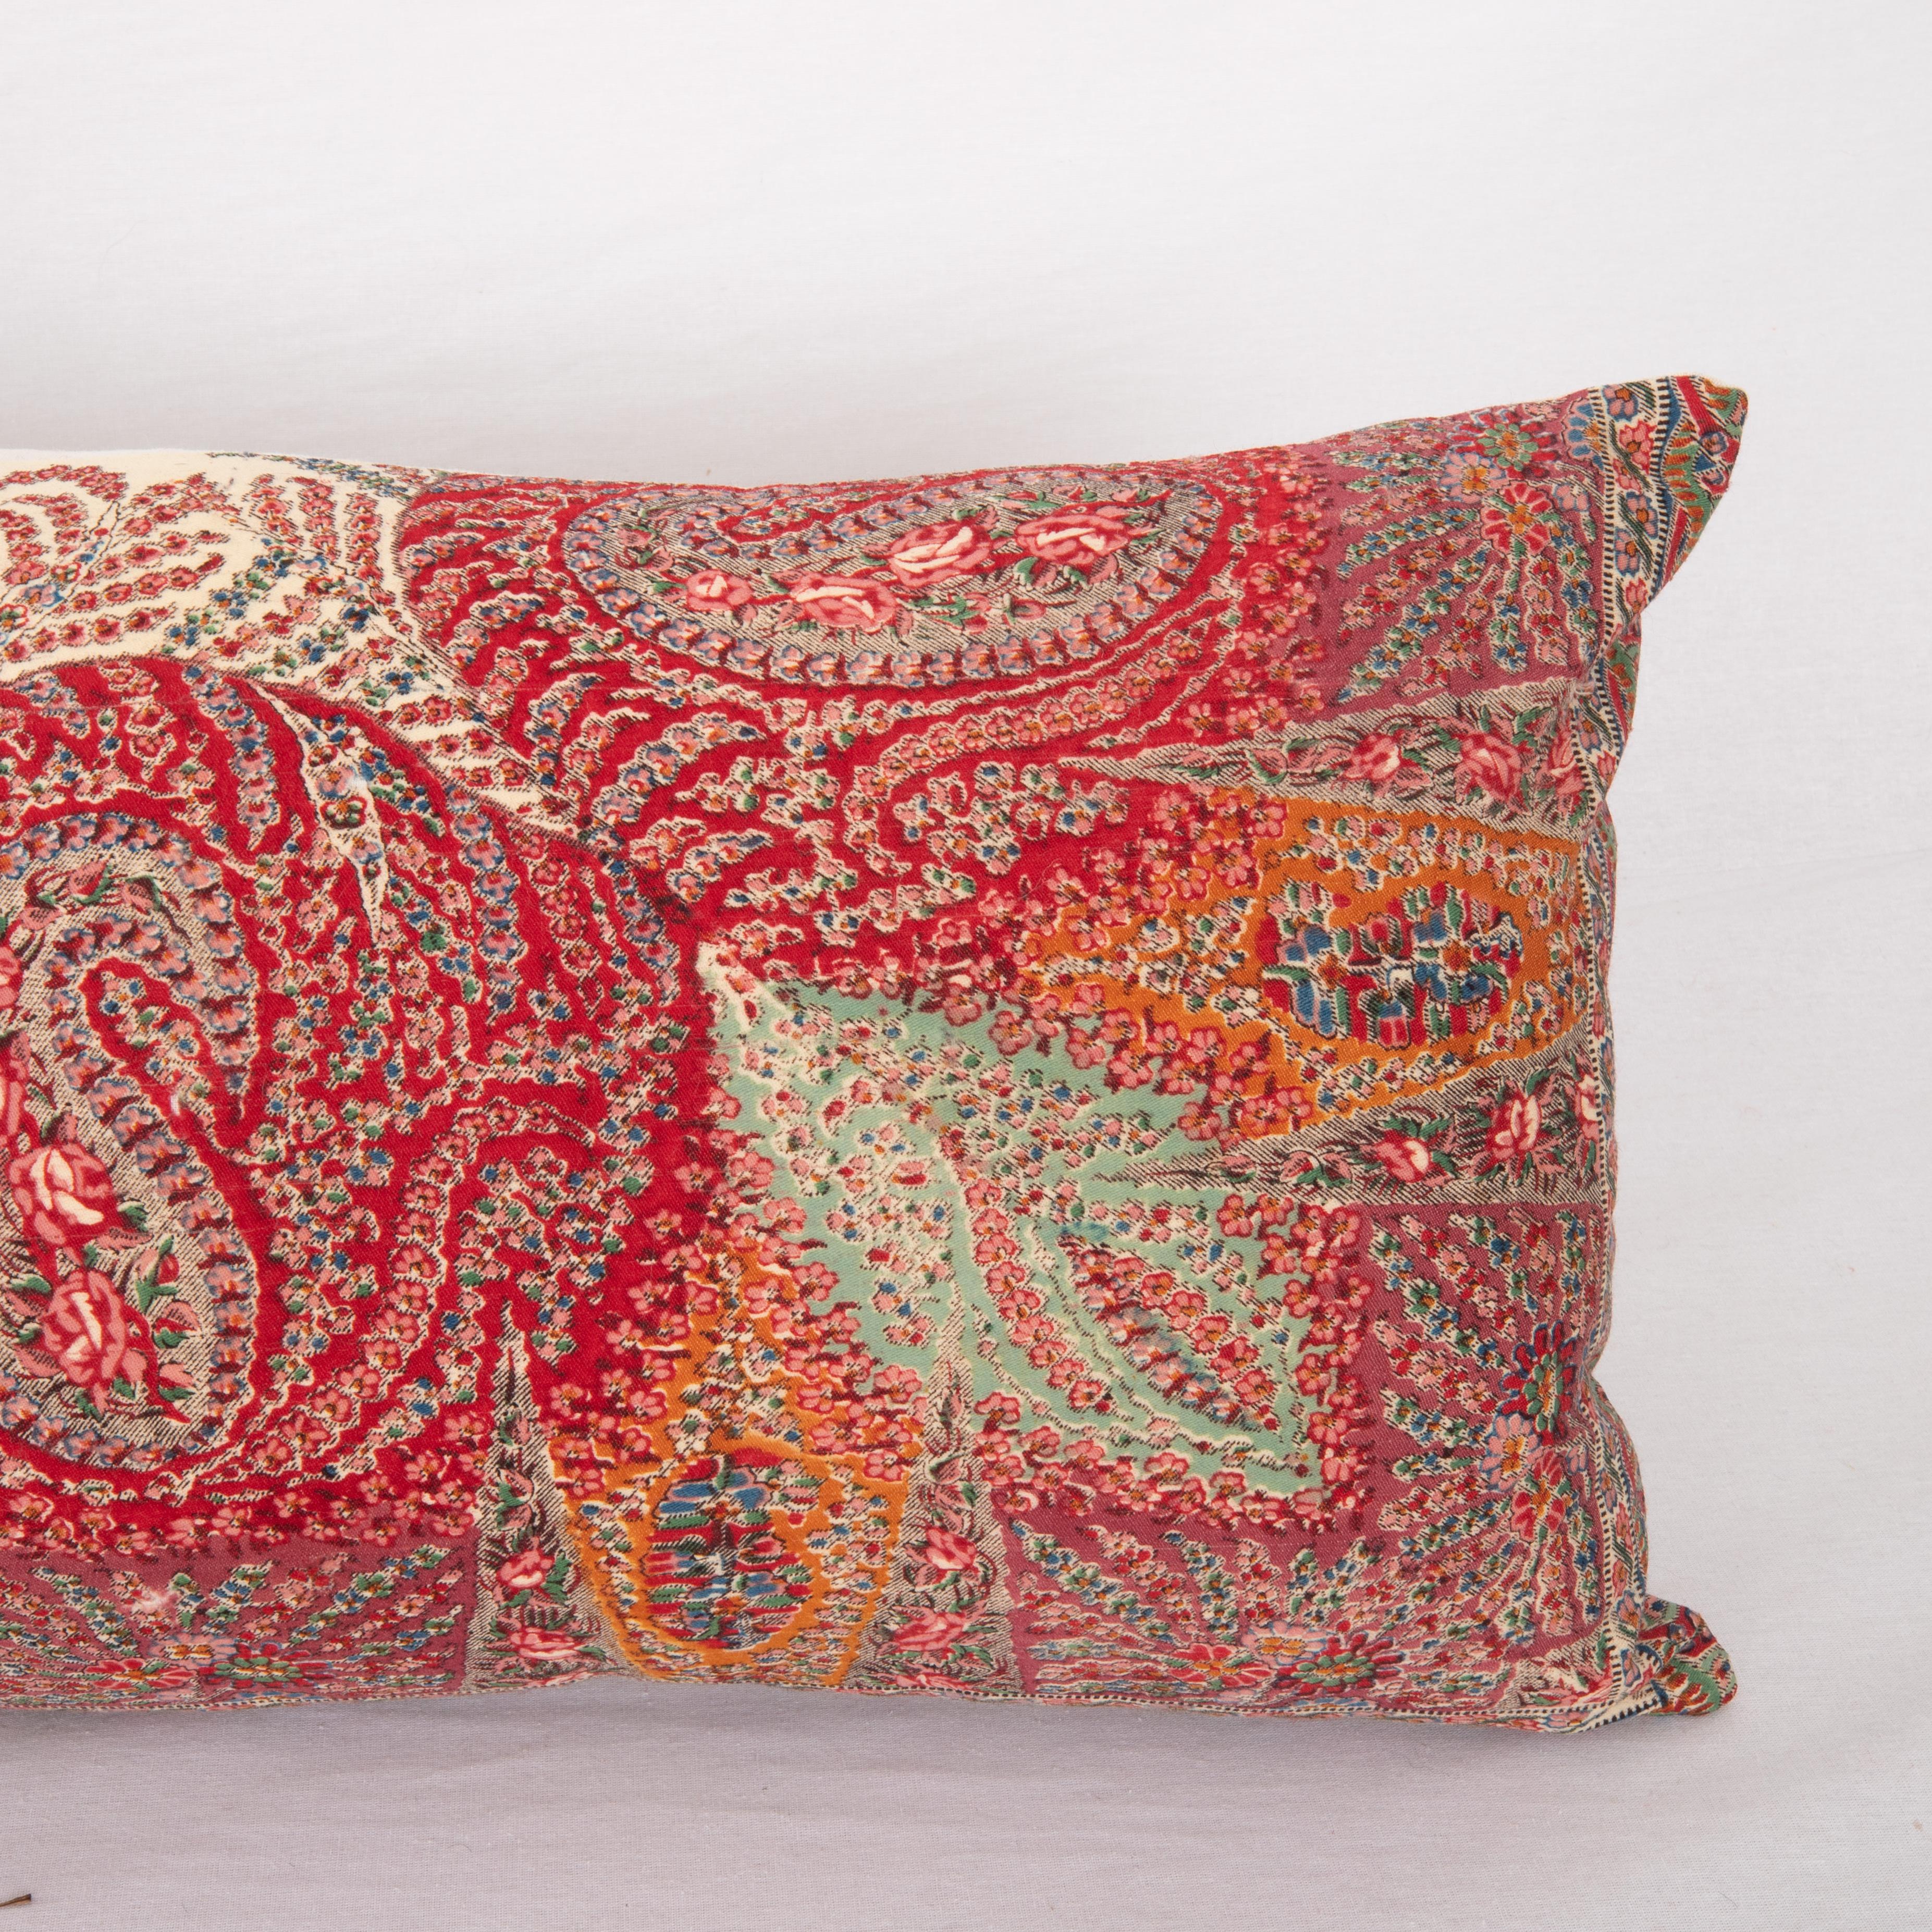 Woven Pillow Cover Made from an English Printed Shawl, 19th C. For Sale